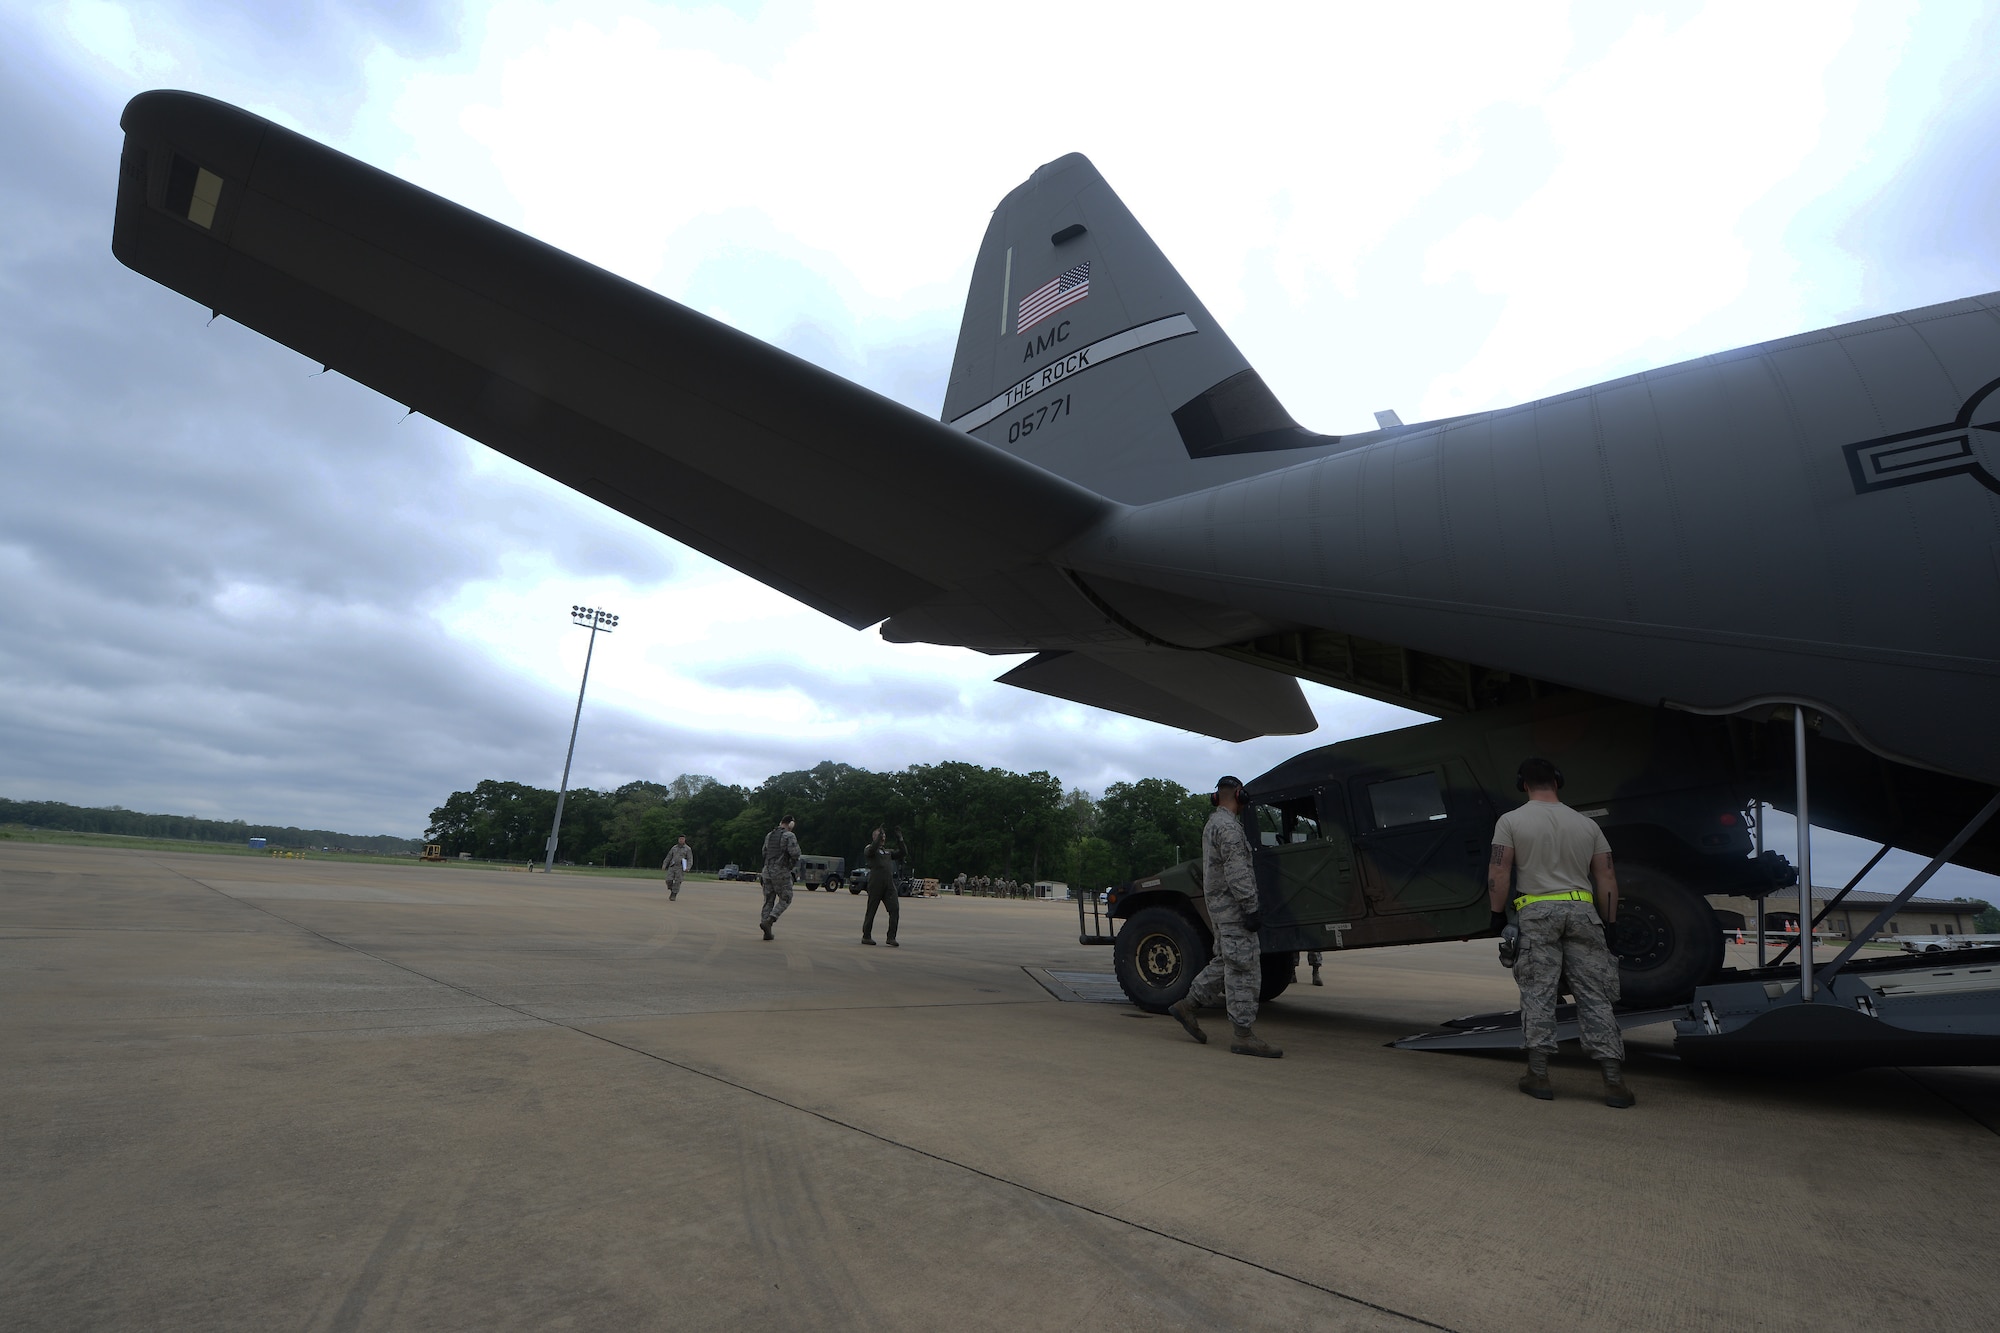 Members of the 621st Contingency Response Squadron Aerial Port team load a HUMVEE onto a C-130 Hercules during a Joint Readiness Training exercise at Alexandria International Airport, LA. April 16, 2016. JRTC is a multinational exercise focused on pre-deployment and airdrop capabilities. (U.S. Air Force photo by Senior Airman Joshua King)